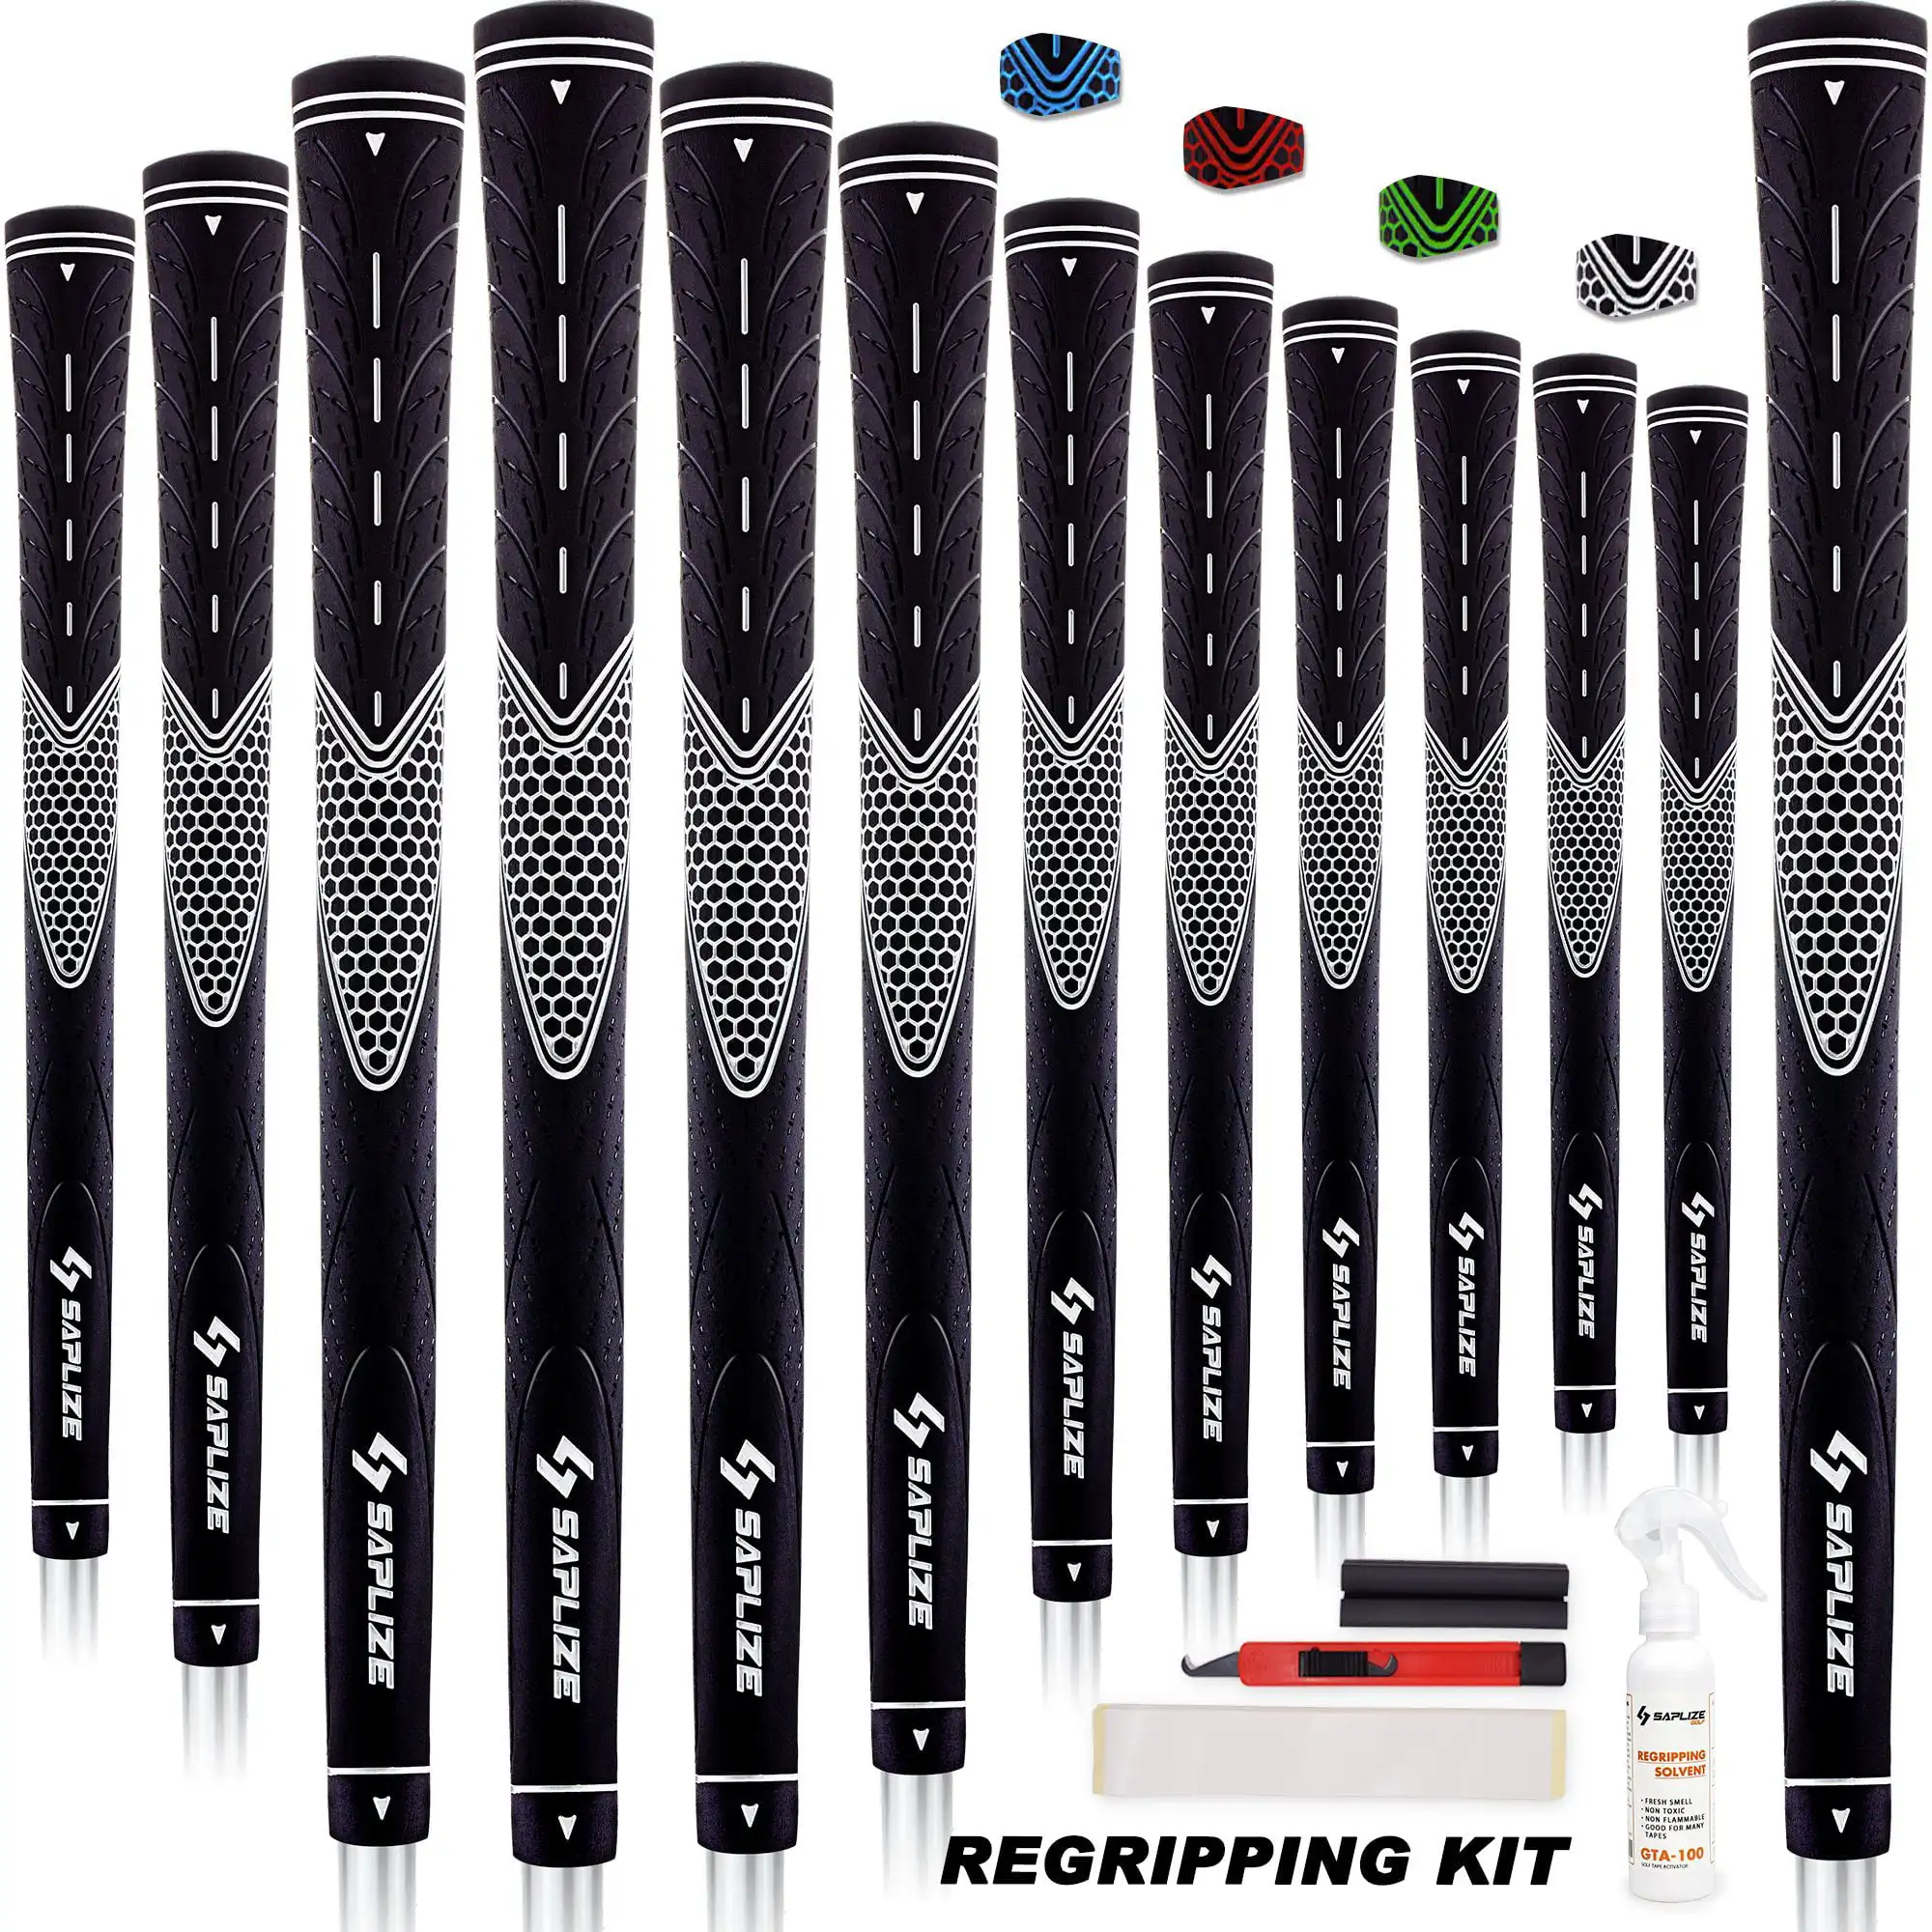 13 Golf Grips with Complete Regripping Kit, 4 Colors Available, Standard/Mid  Grips